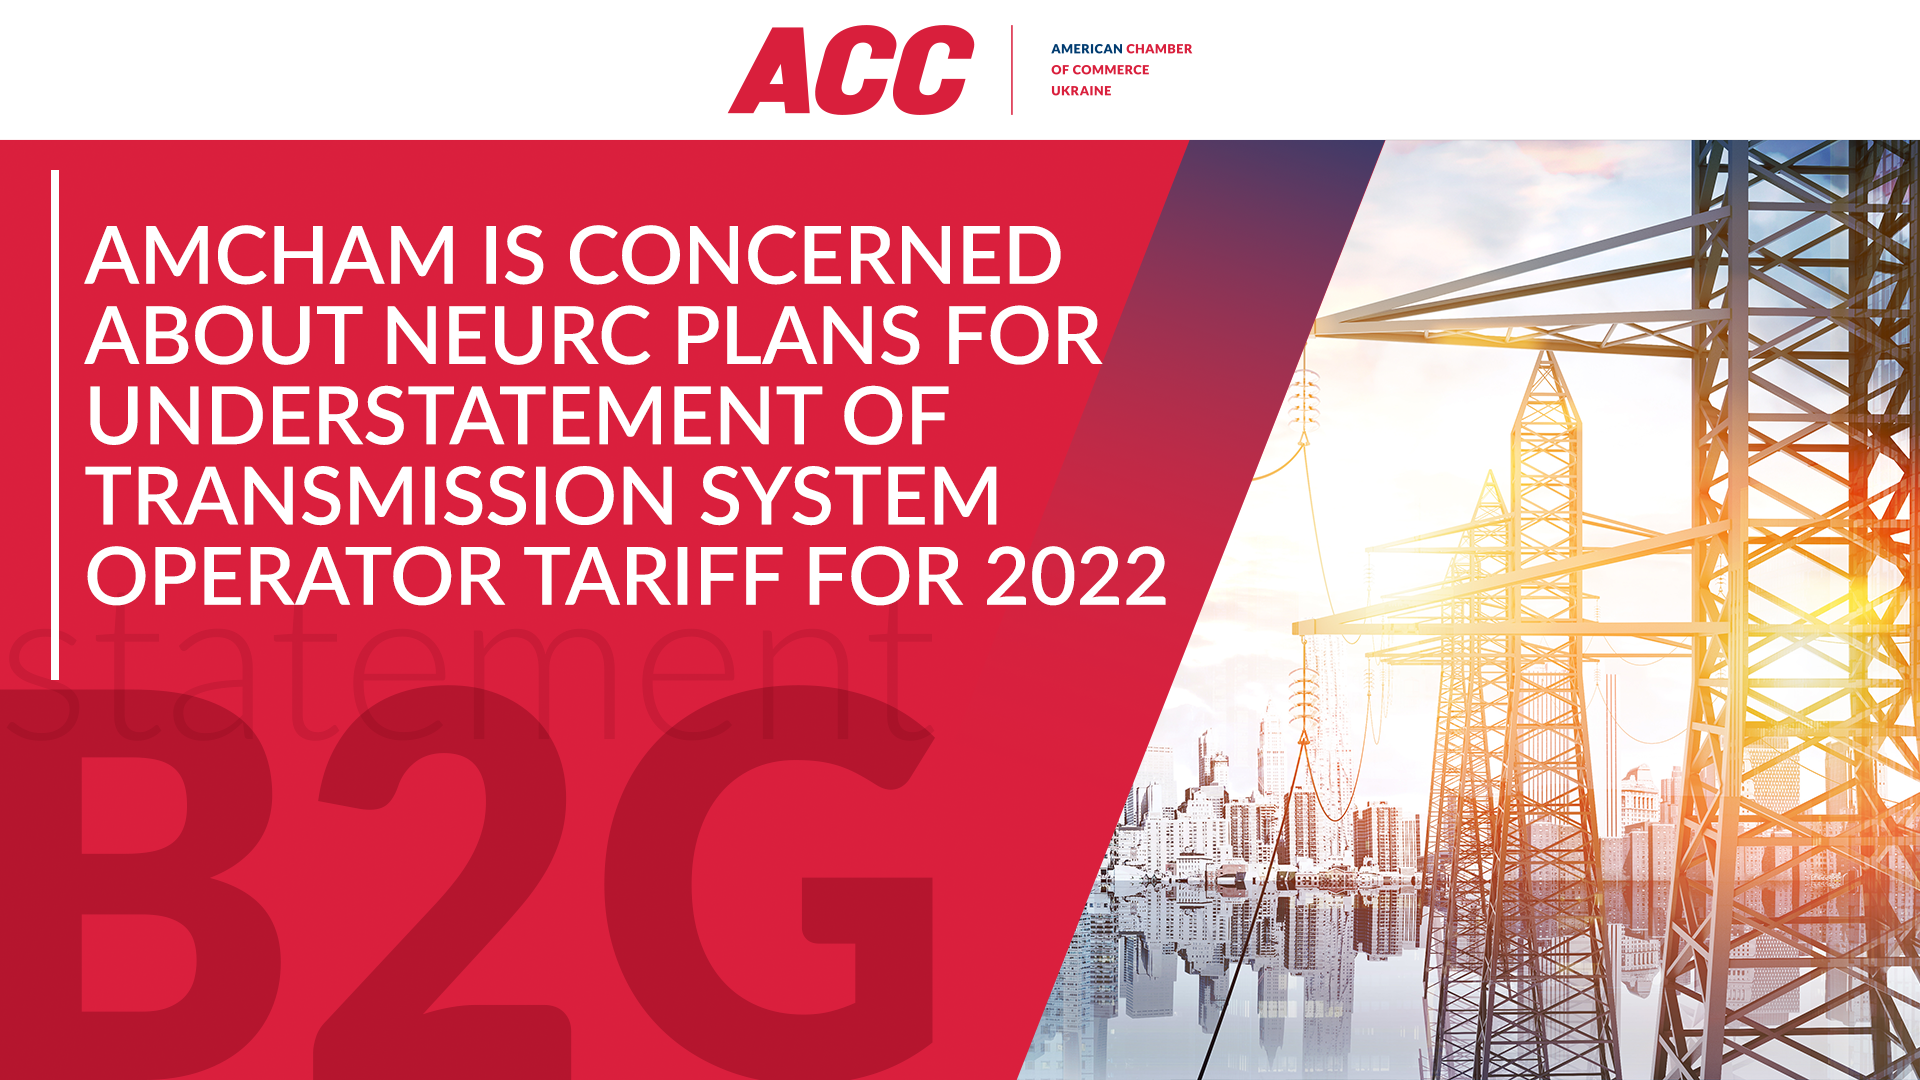 AmCham is Concerned about NEURC Plans for Understatement of Transmission System Operator Tariff for 2022